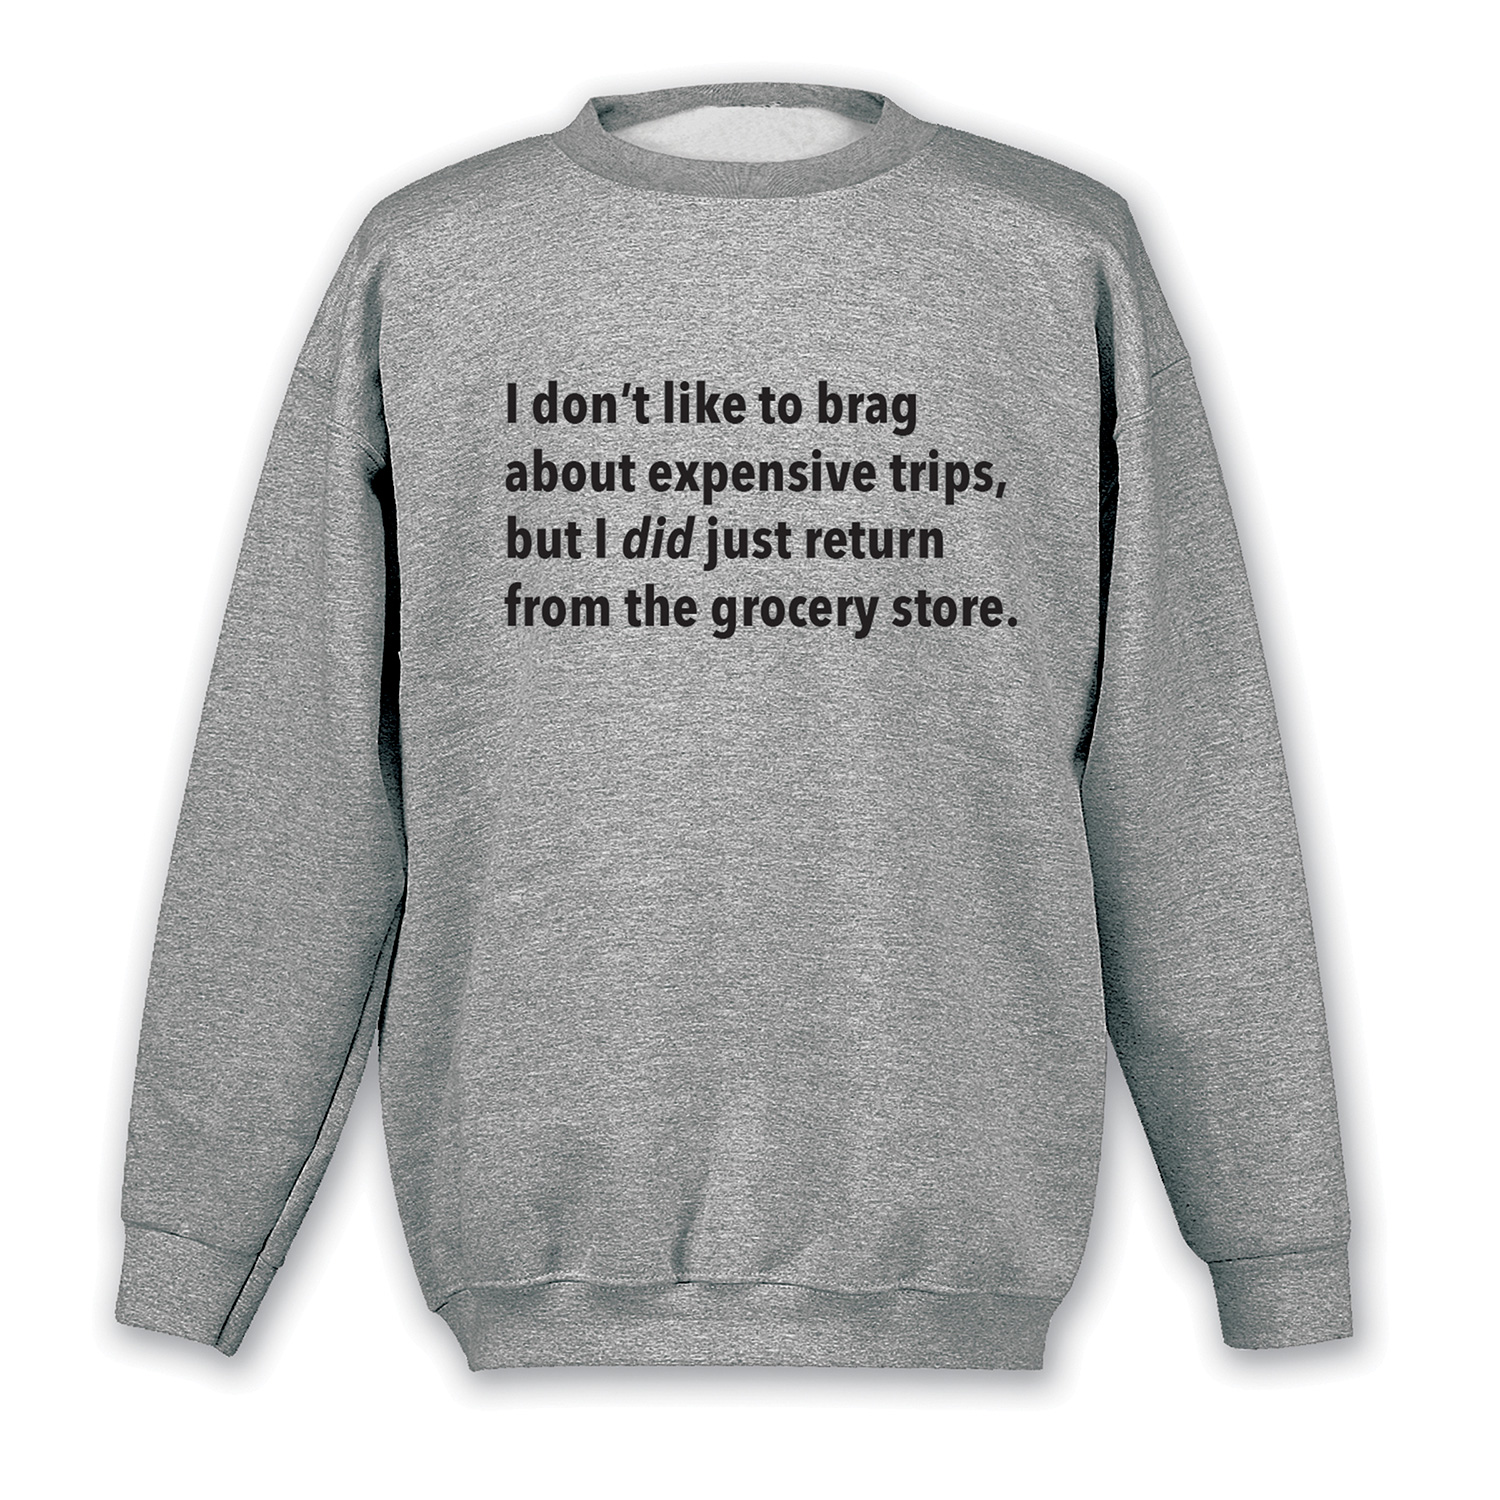 I Don’t Like to Brag T-Shirt or Sweatshirt - Grocery Store | Signals